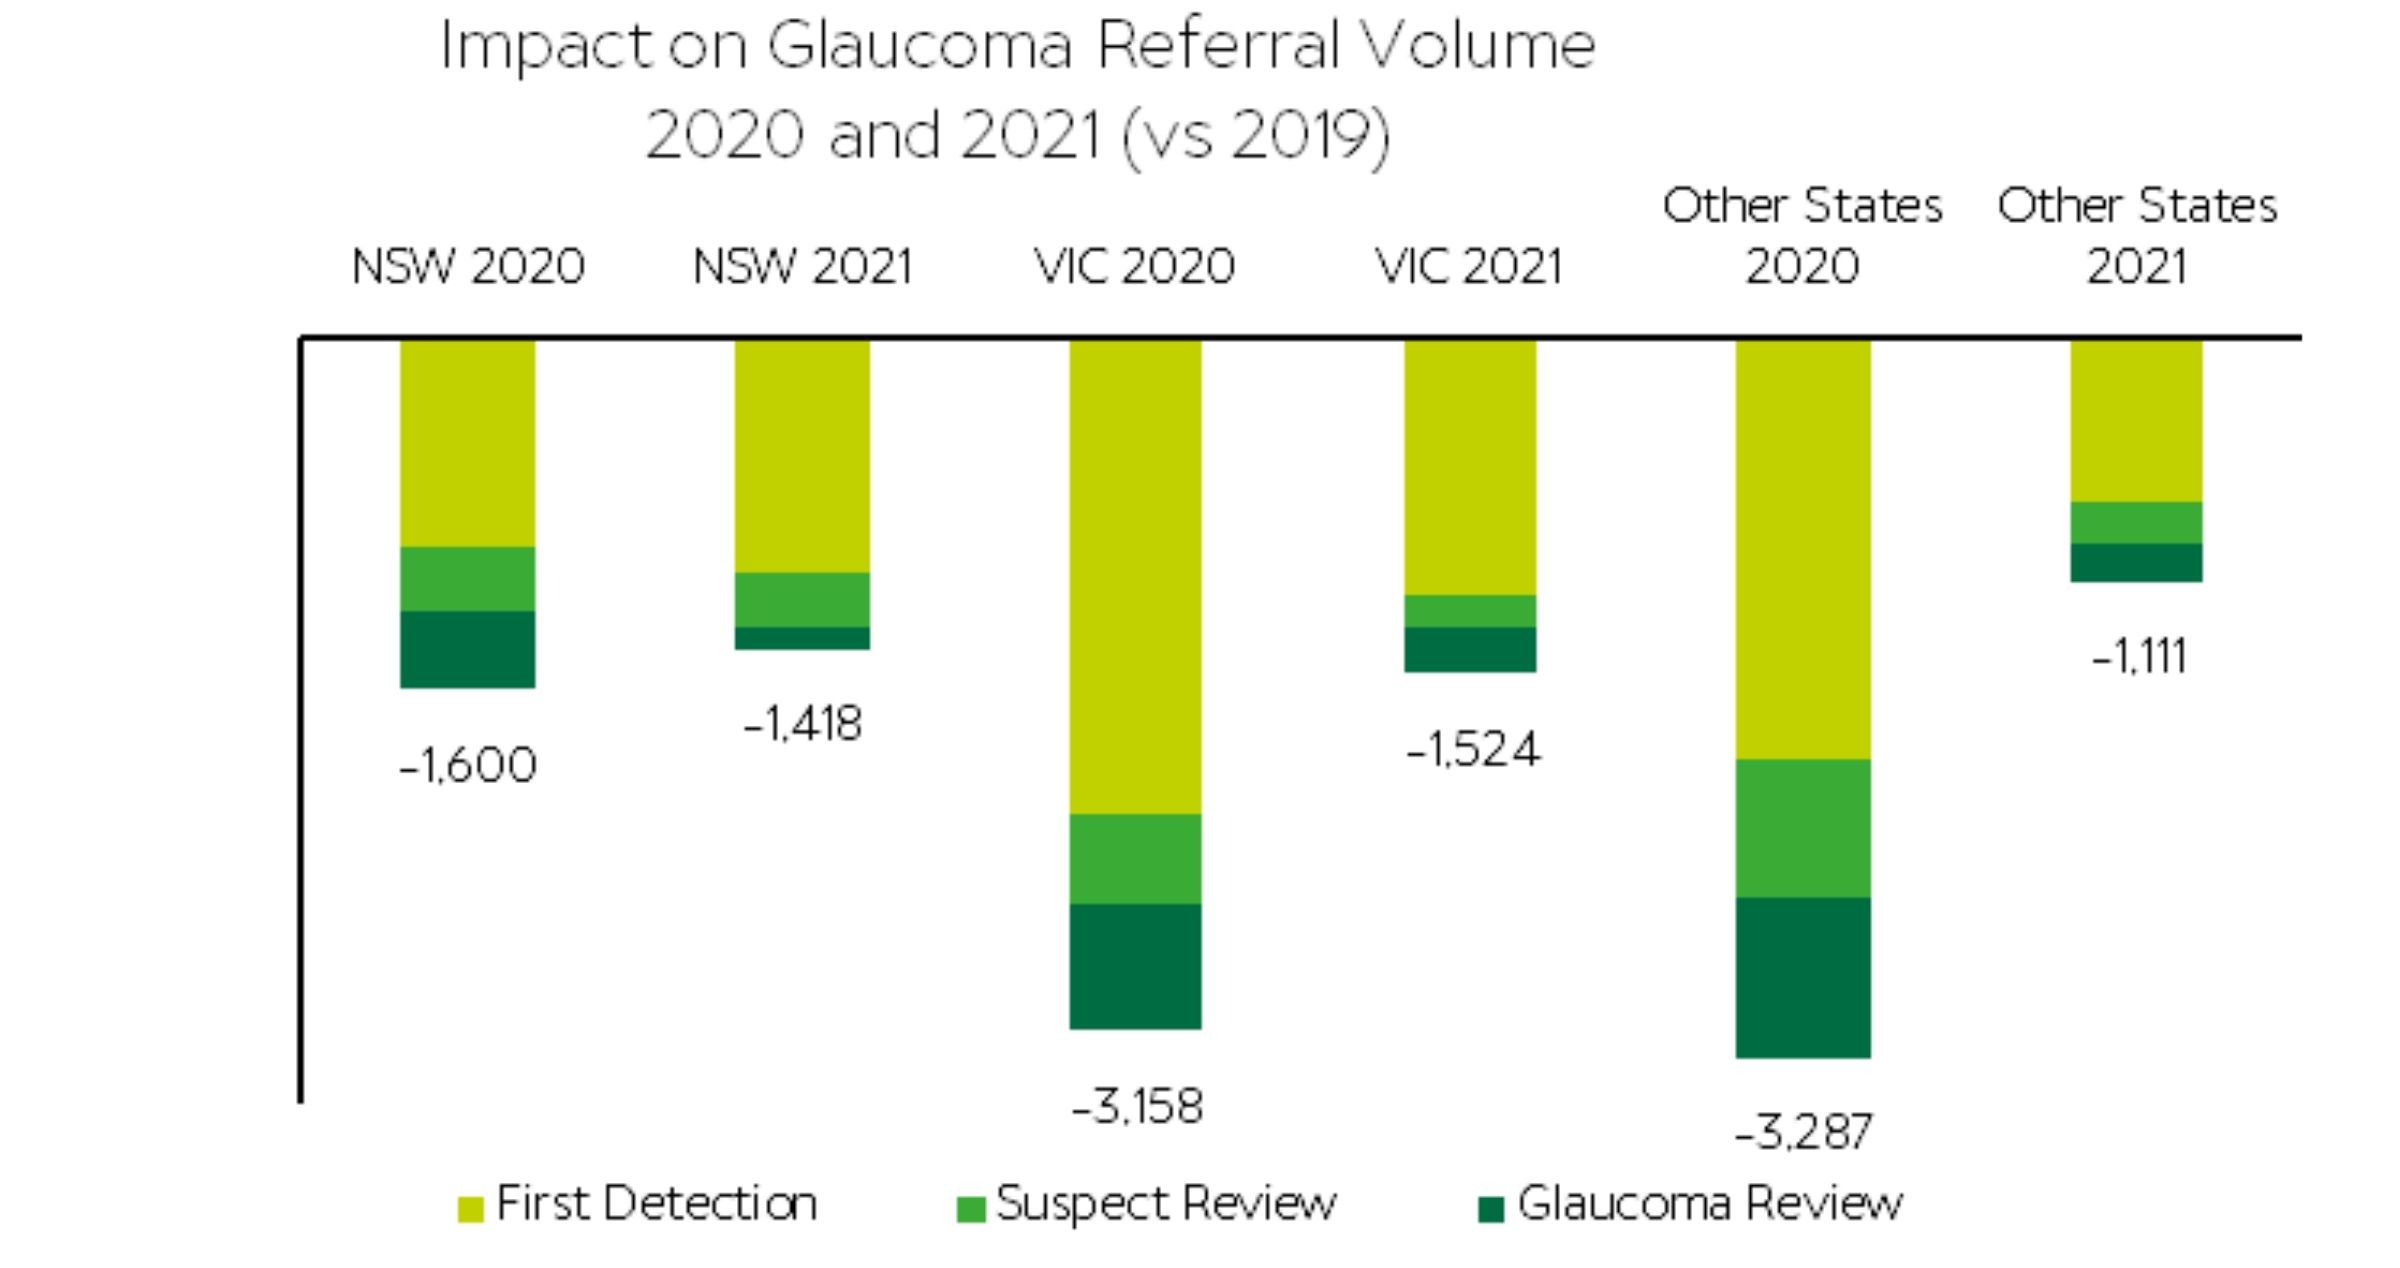 Figure 5 – More than 8,000 patients who were not referred for newly detected glaucoma in 2020 and 2021.